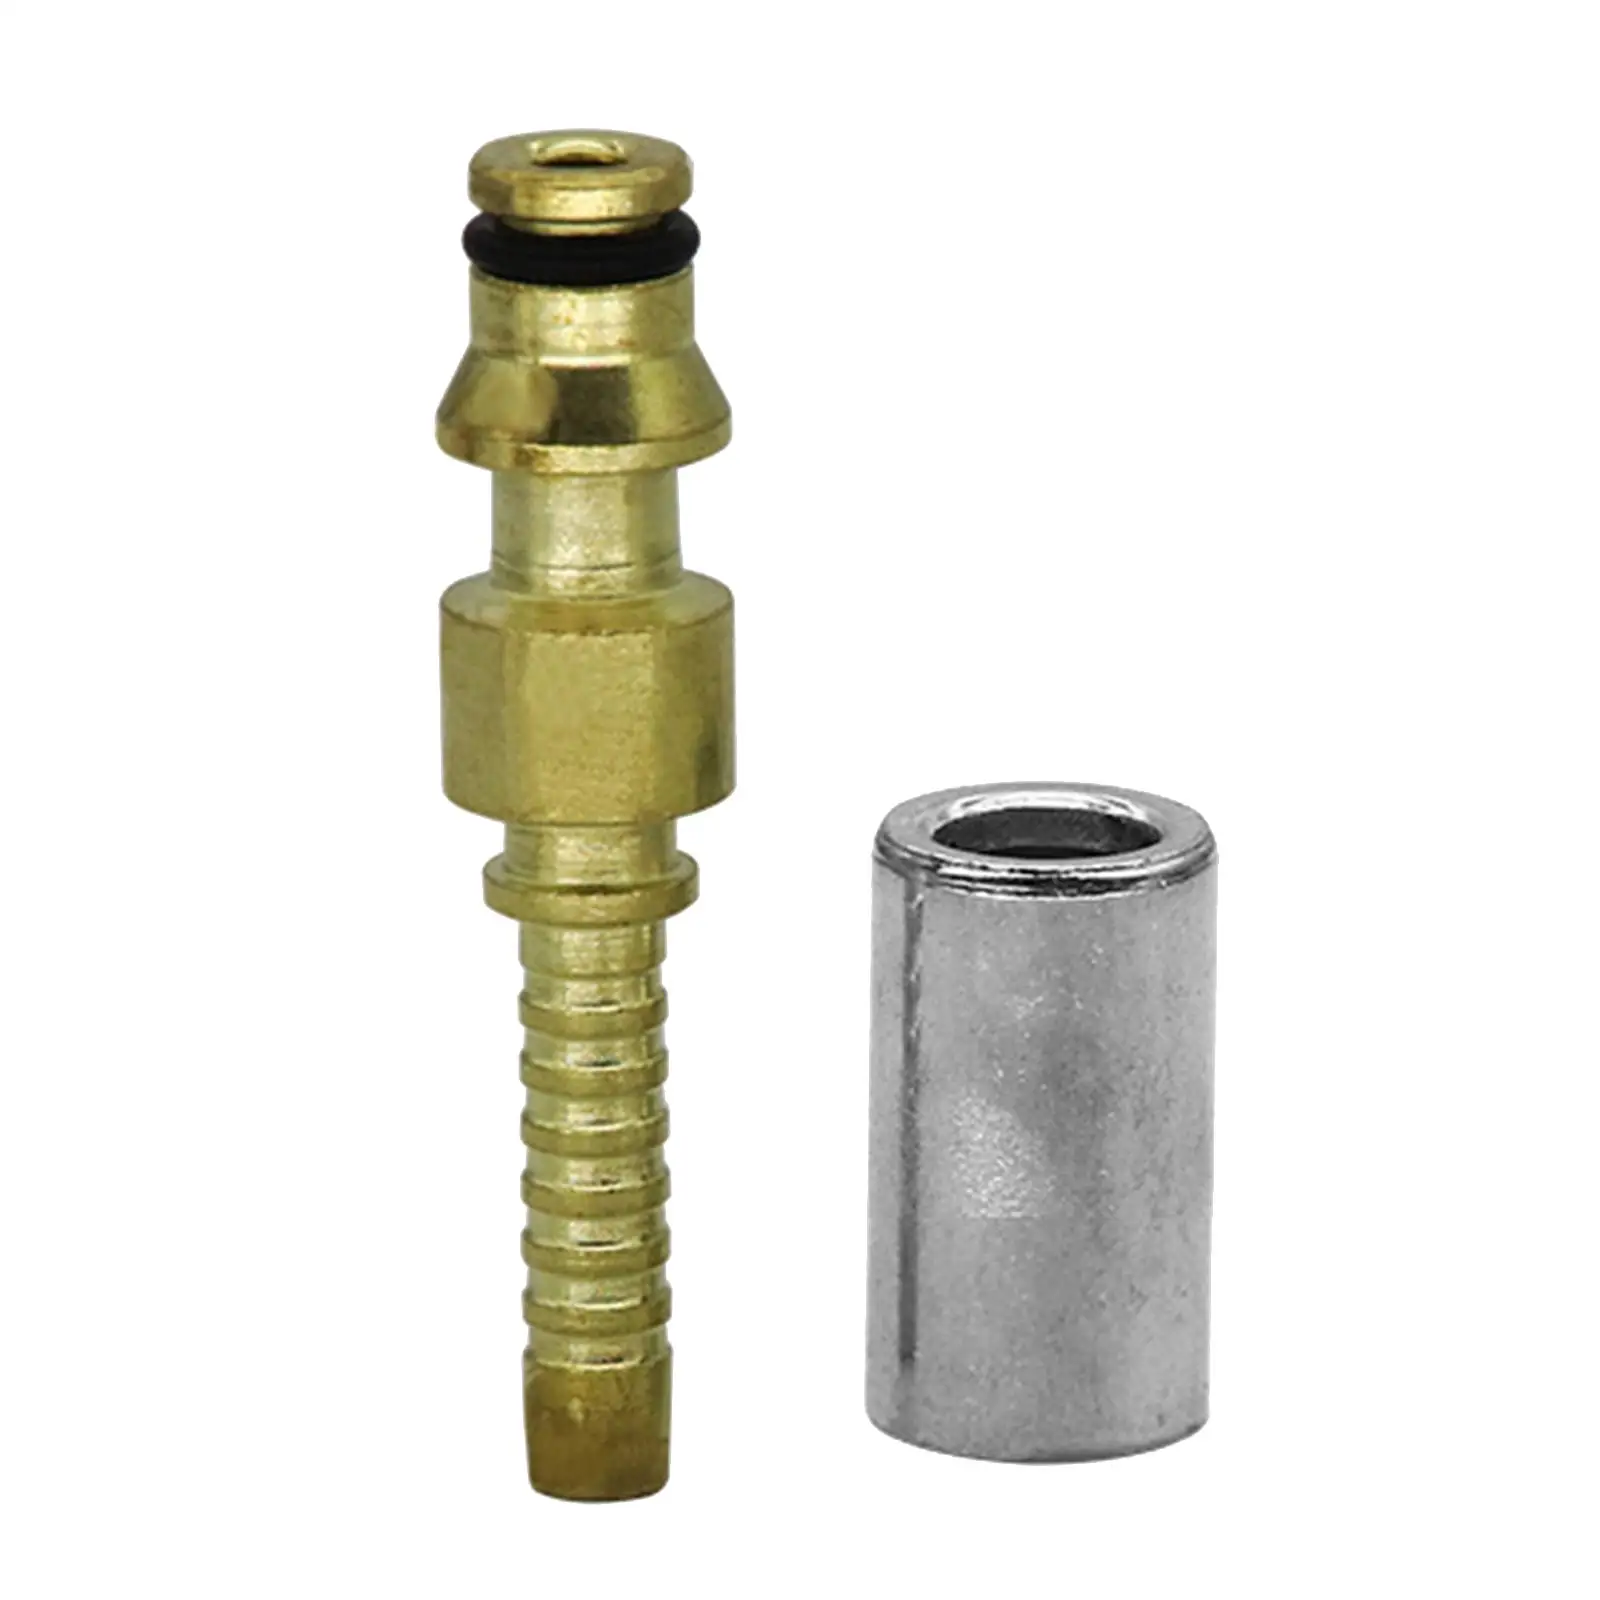 Car Washer Pipe Joint Fittings Tools Accessories Hose Fittings Washer Hose Connector Converter Connector